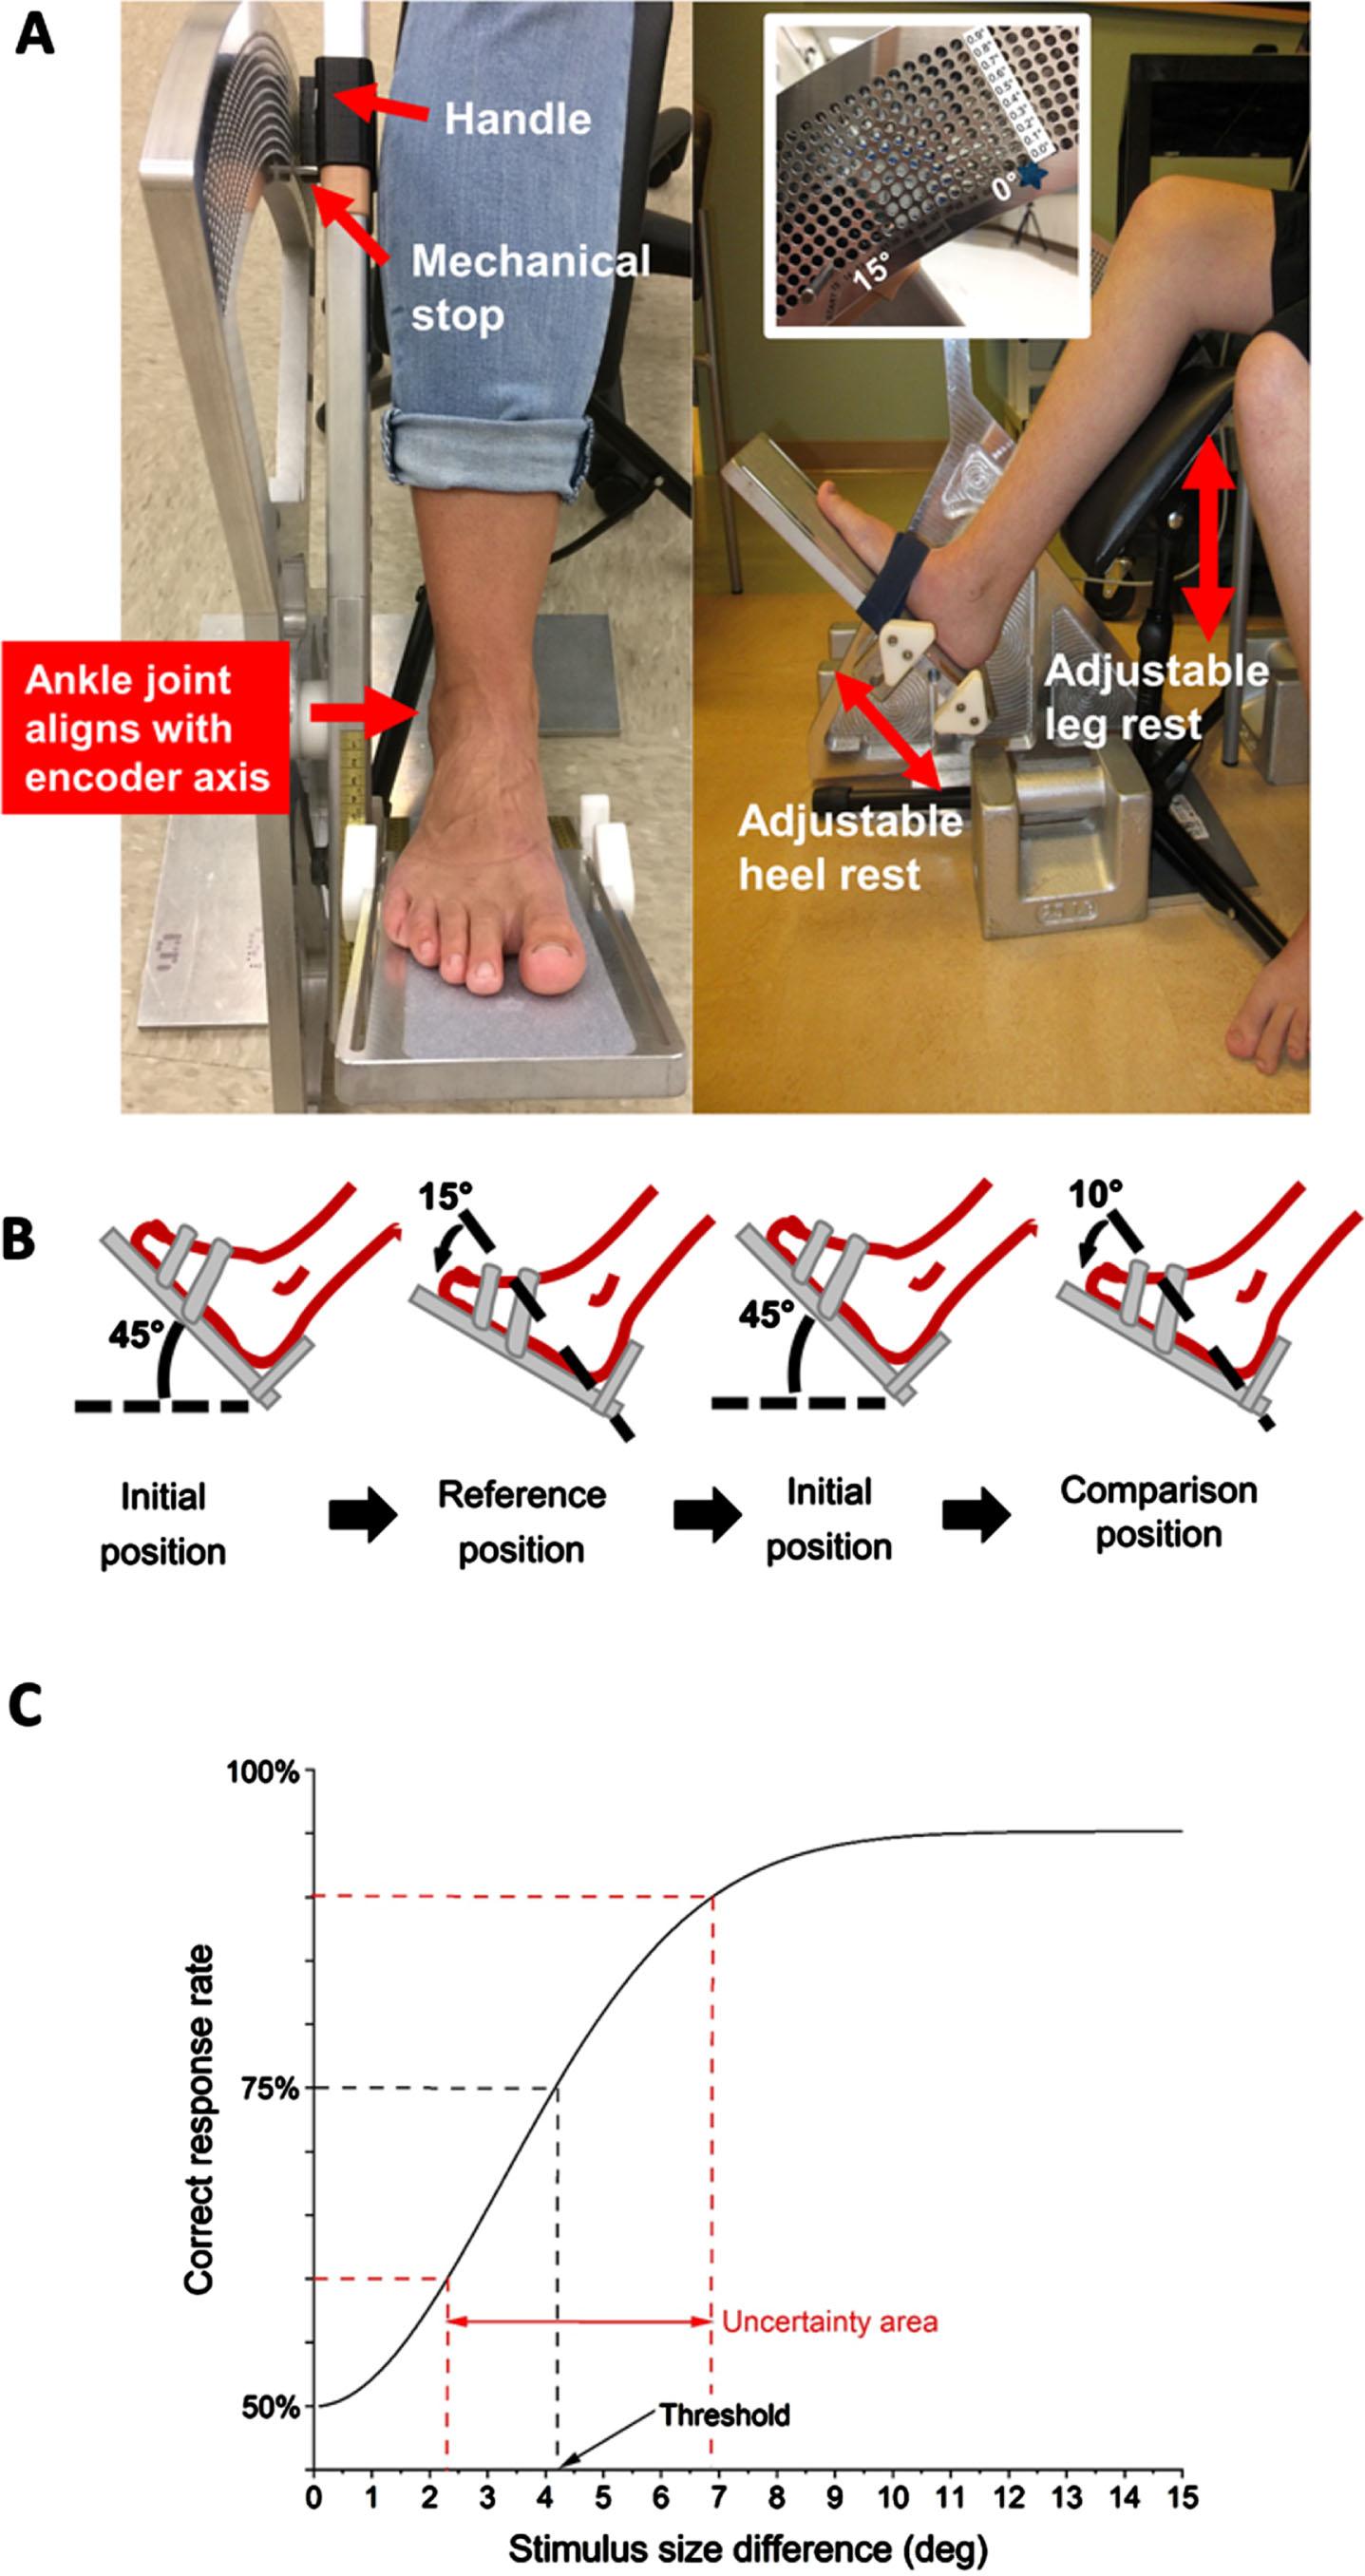 A. Front and side view of the manual Ankle Proprioceptive Acuity System. Rotating the handle by the researcher rotates the ankle. Desired degree of rotation can be set by mechanical stops in the semicircular pegboard at 0.1° increments. The system components can be adjusted to the leg anthropometrics of the participant, so that the approximate ankle joint axis aligns with the axis of rotation of the device. B. Example of the time course of a single trial. All trials started at the neutral 45° position. Reference position was always at 15° plantarflexion. Here, the researcher rotates the foot to the reference position, then returns the footrest to the initial position before rotating it to the comparison position (10° plantarflexion in this example). Thus, the stimulus difference is 5°. The participant indicates which experienced position (1st or 2nd) was closer to the floor. C. Example of a derived psychometric function. The just noticeable difference threshold corresponds to the difference between reference and comparison position at the 75% correct response rate. The uncertainty area is defined as the distance between the stimulus size differences at the 60th and 90th percentiles.